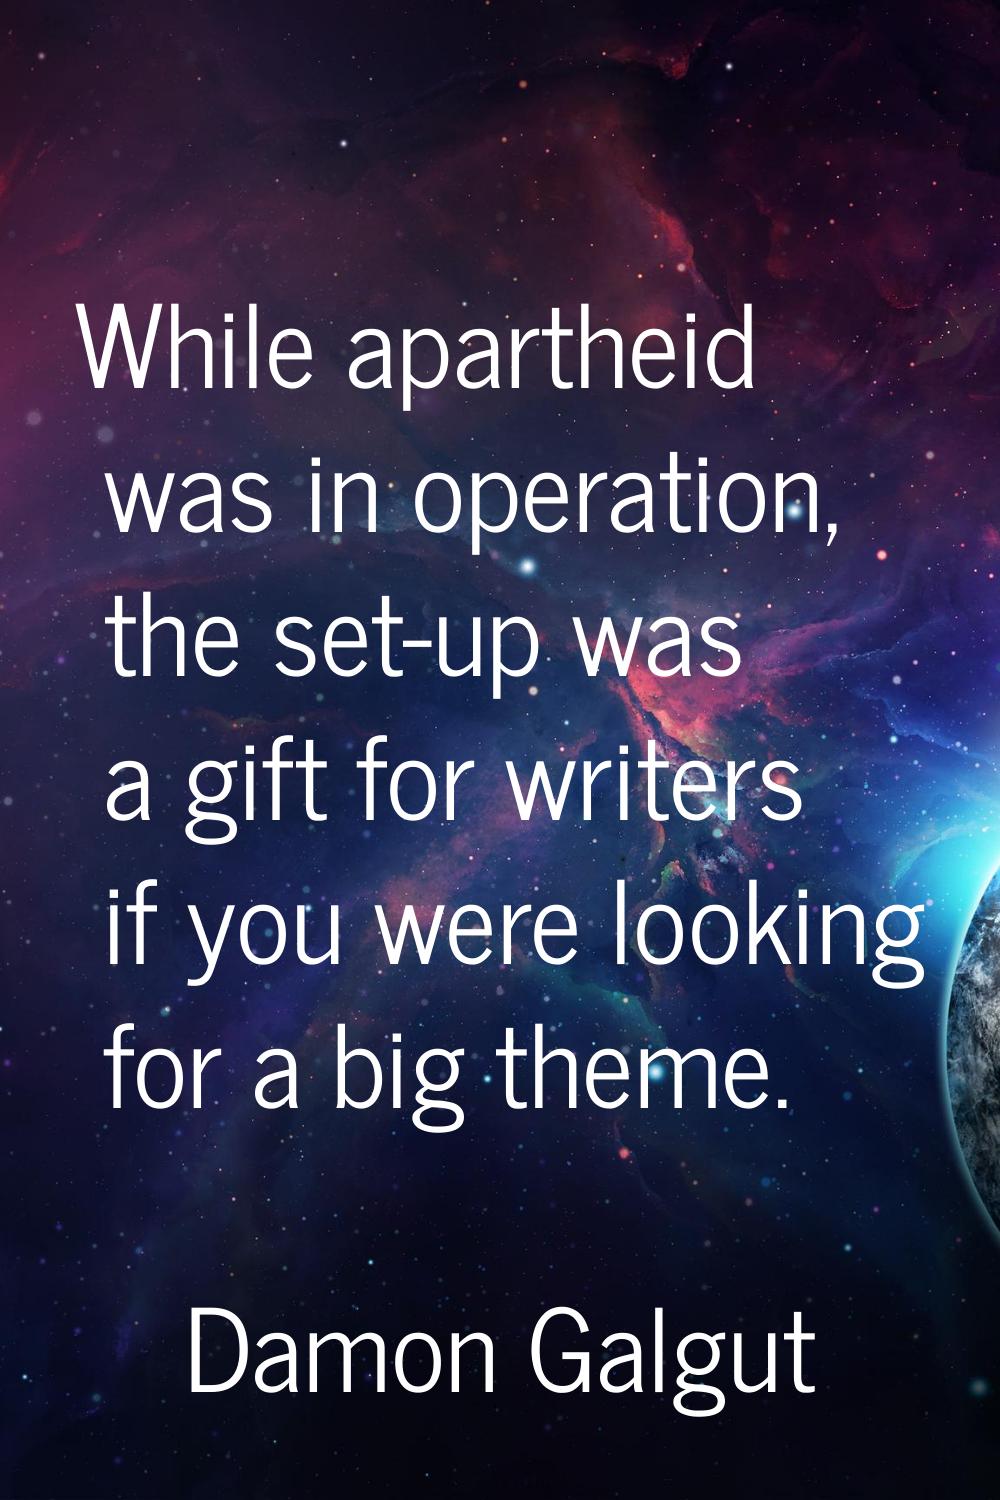 While apartheid was in operation, the set-up was a gift for writers if you were looking for a big t